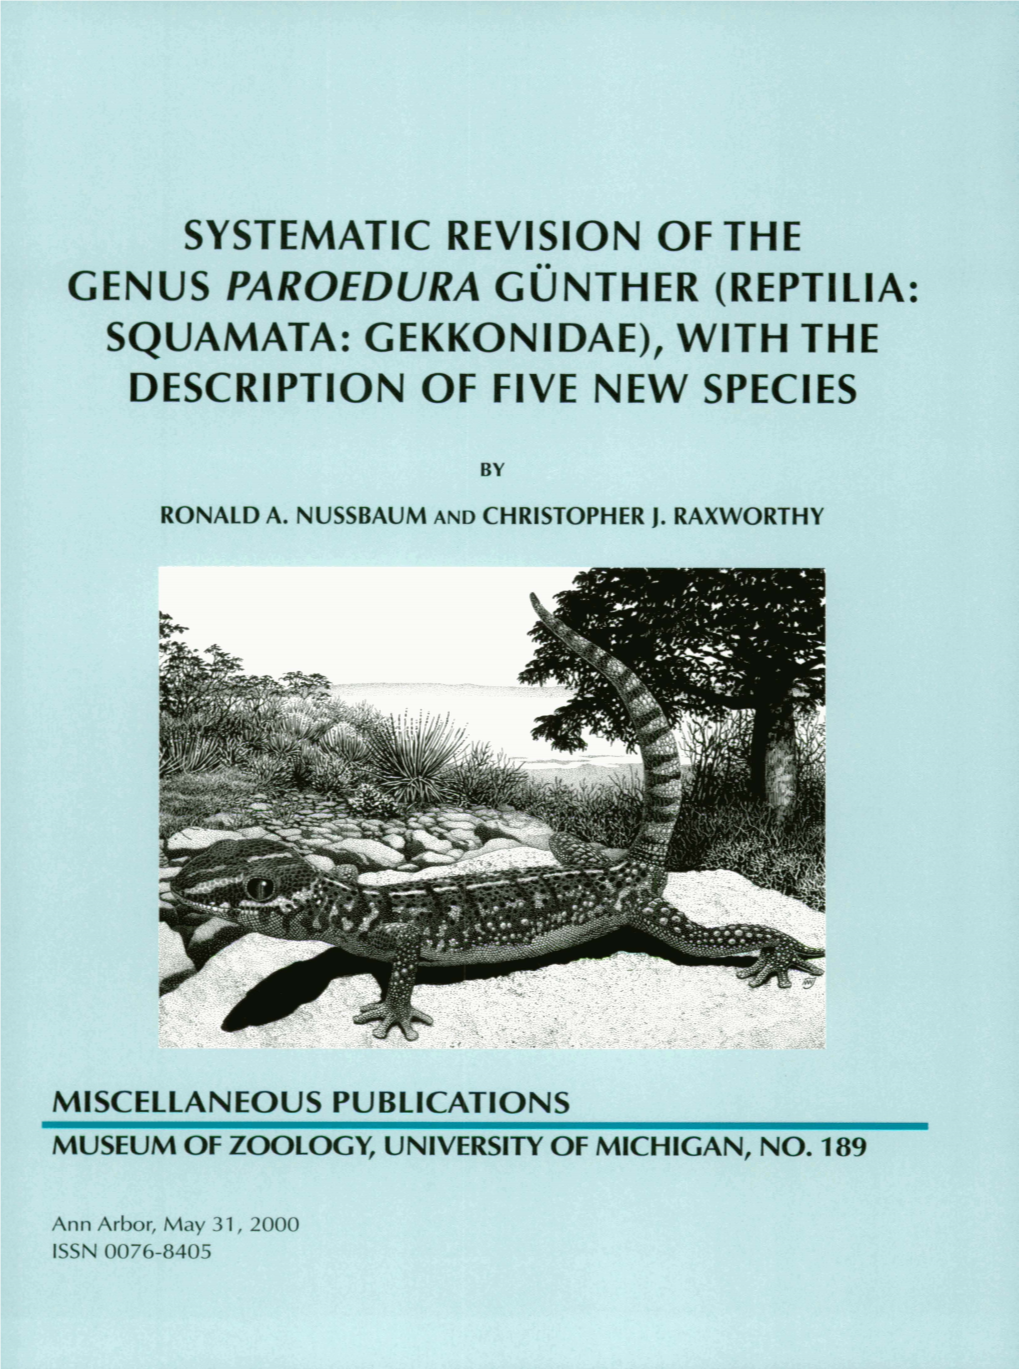 With the Description of Five New Species